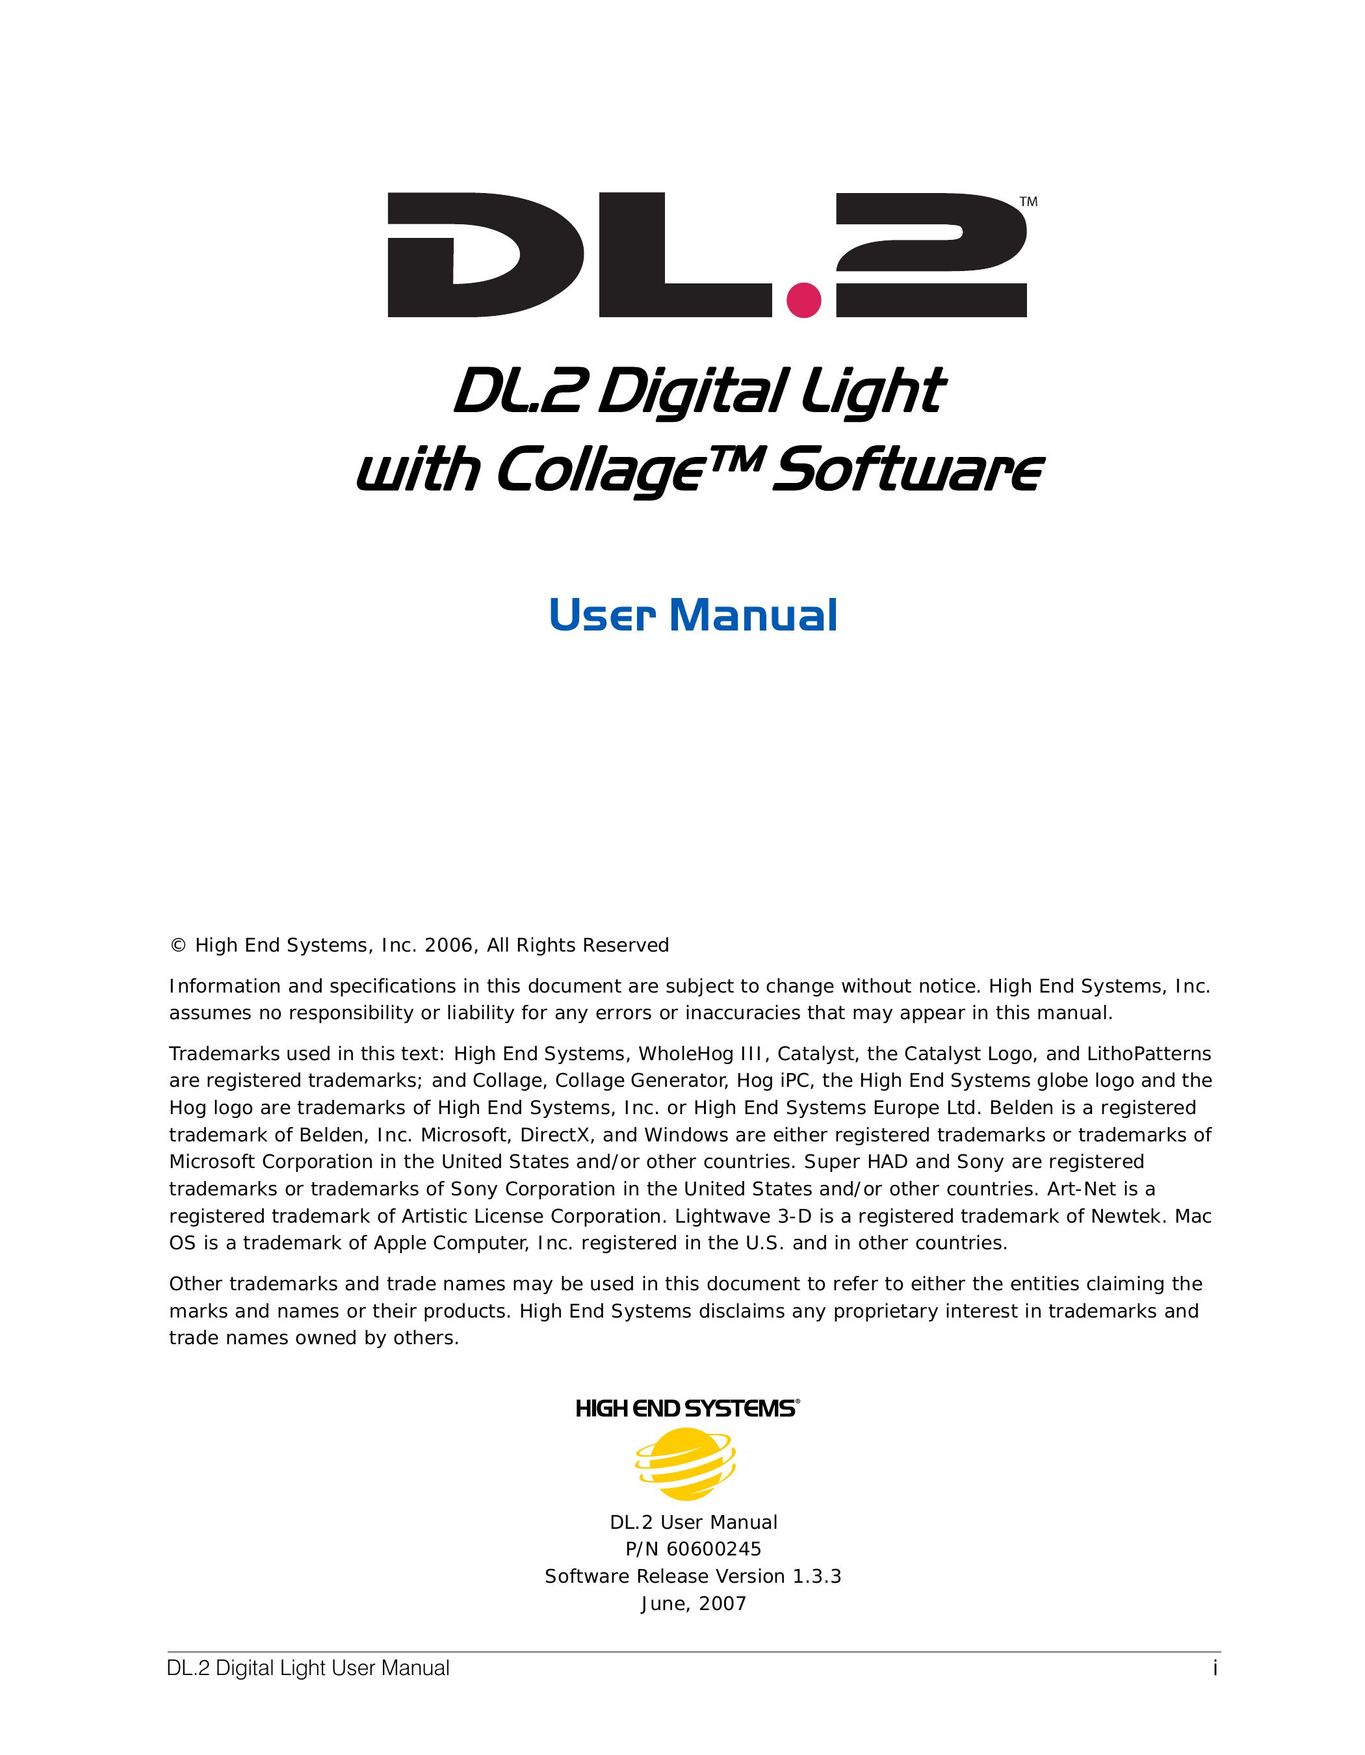 High End Systems DL.2 Projection Television User Manual